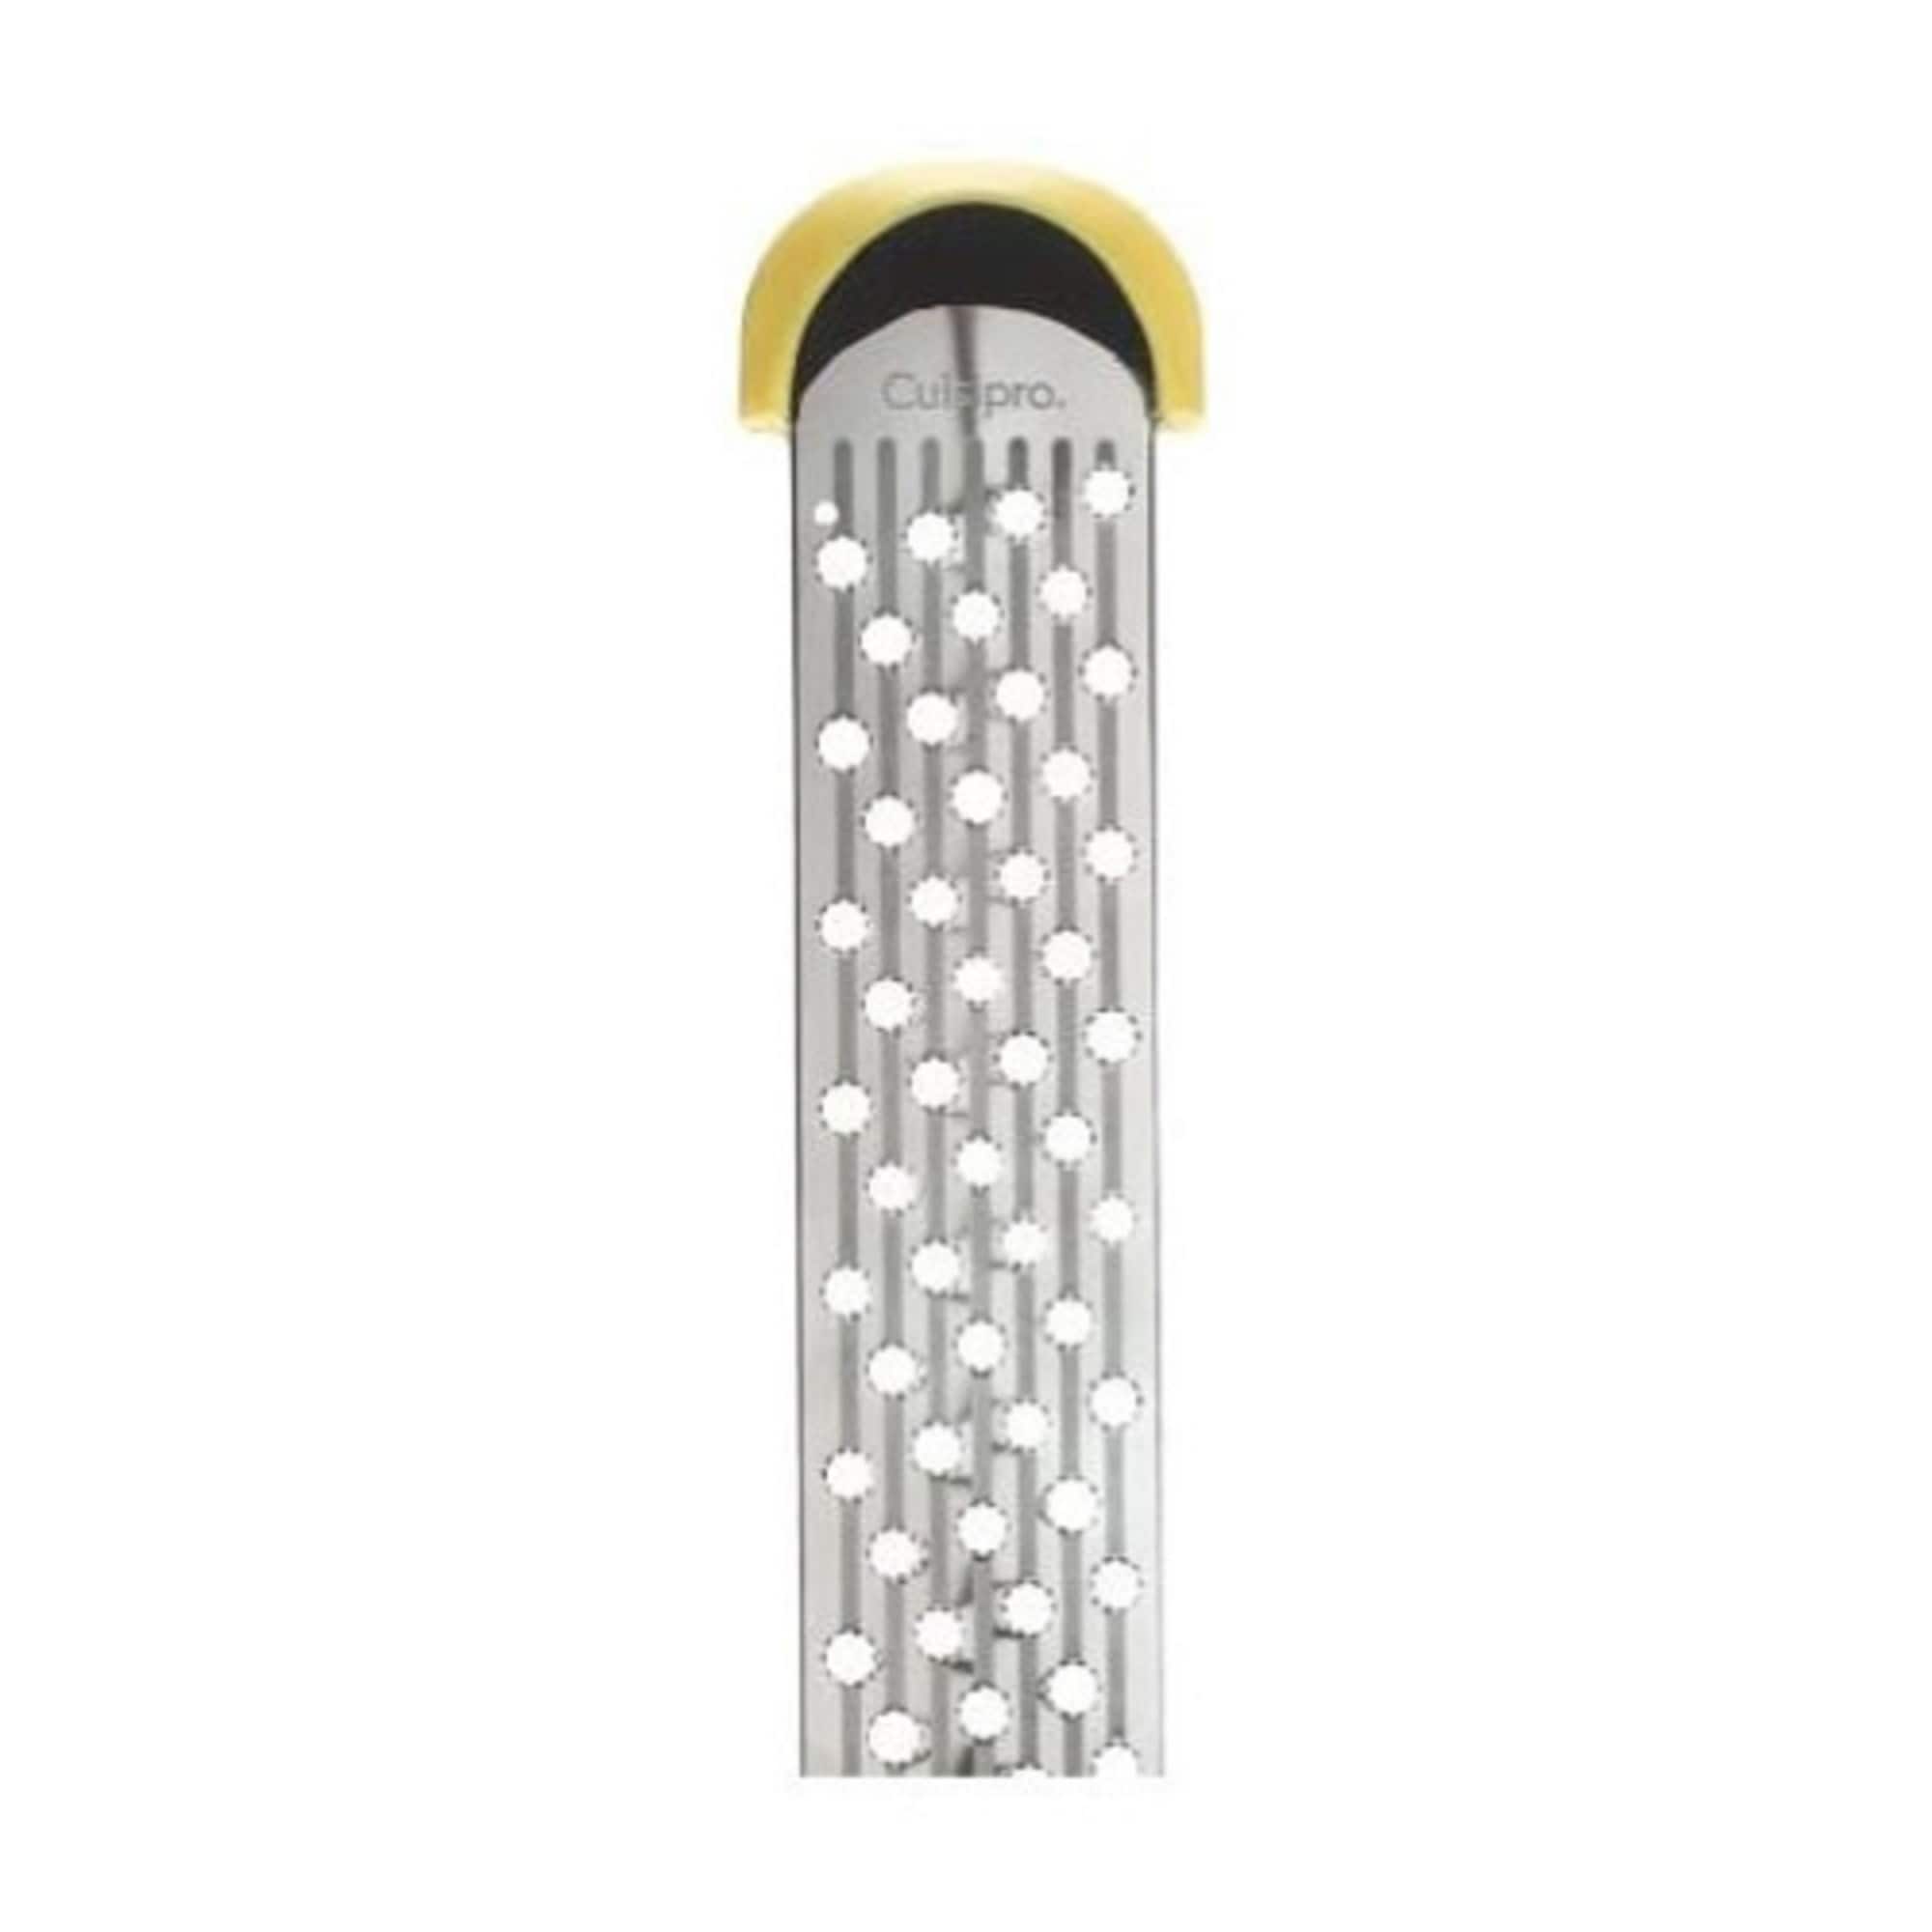 Cuisipro Parmesan Rasp Grater with Surface Glide Technology - Bed Bath &  Beyond - 36293946